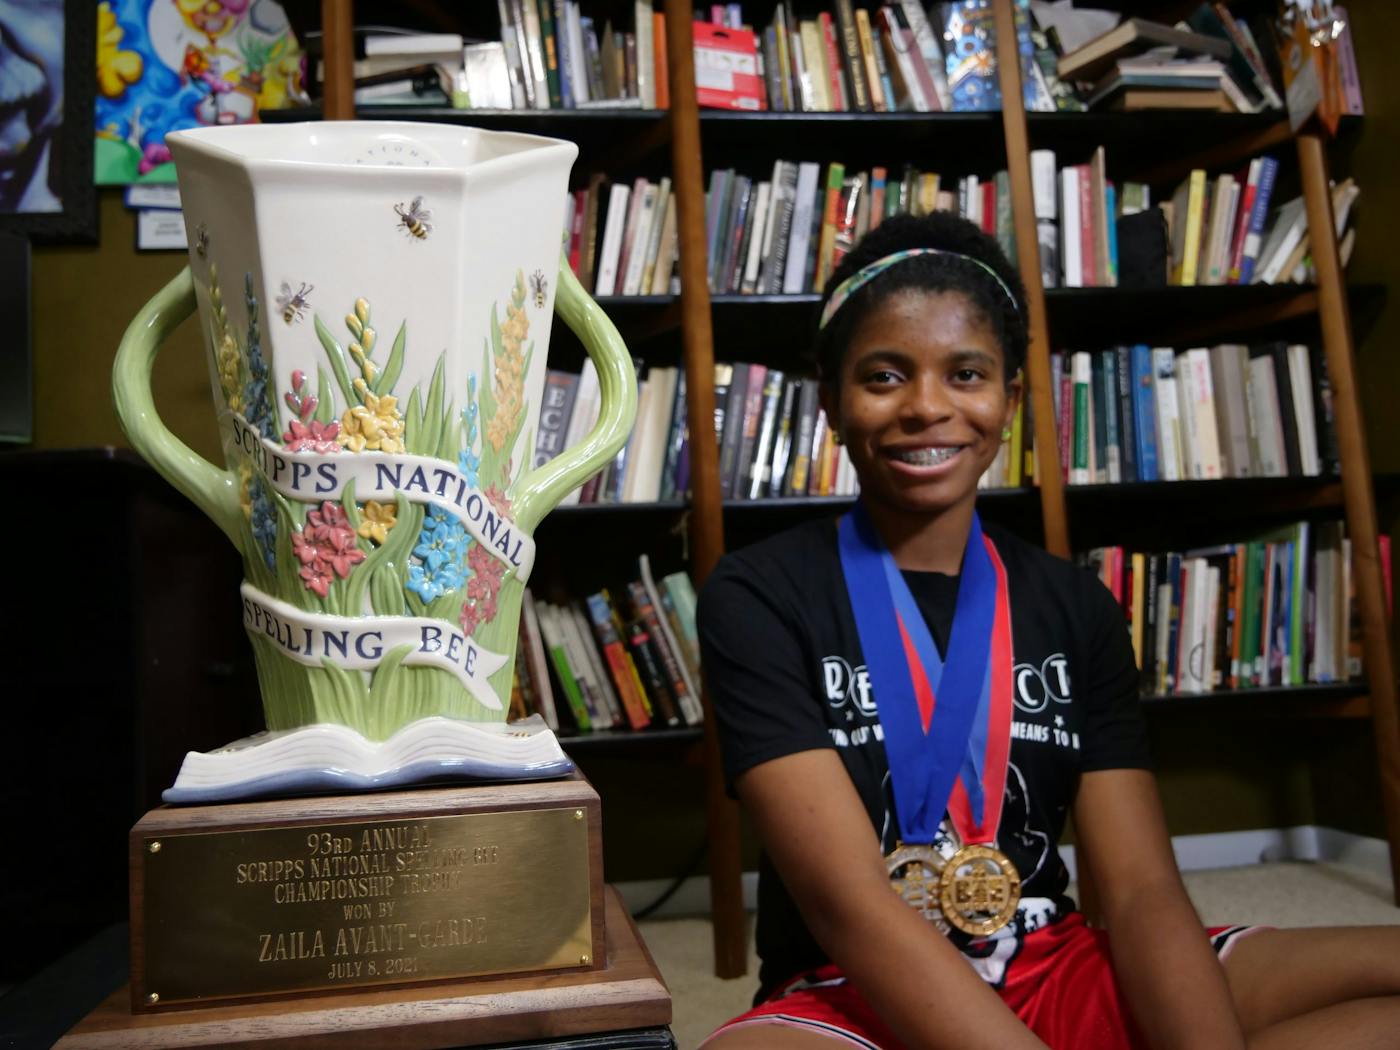 Zaila Avantgarde Made Spelling Bee History. What Will the 15YearOld